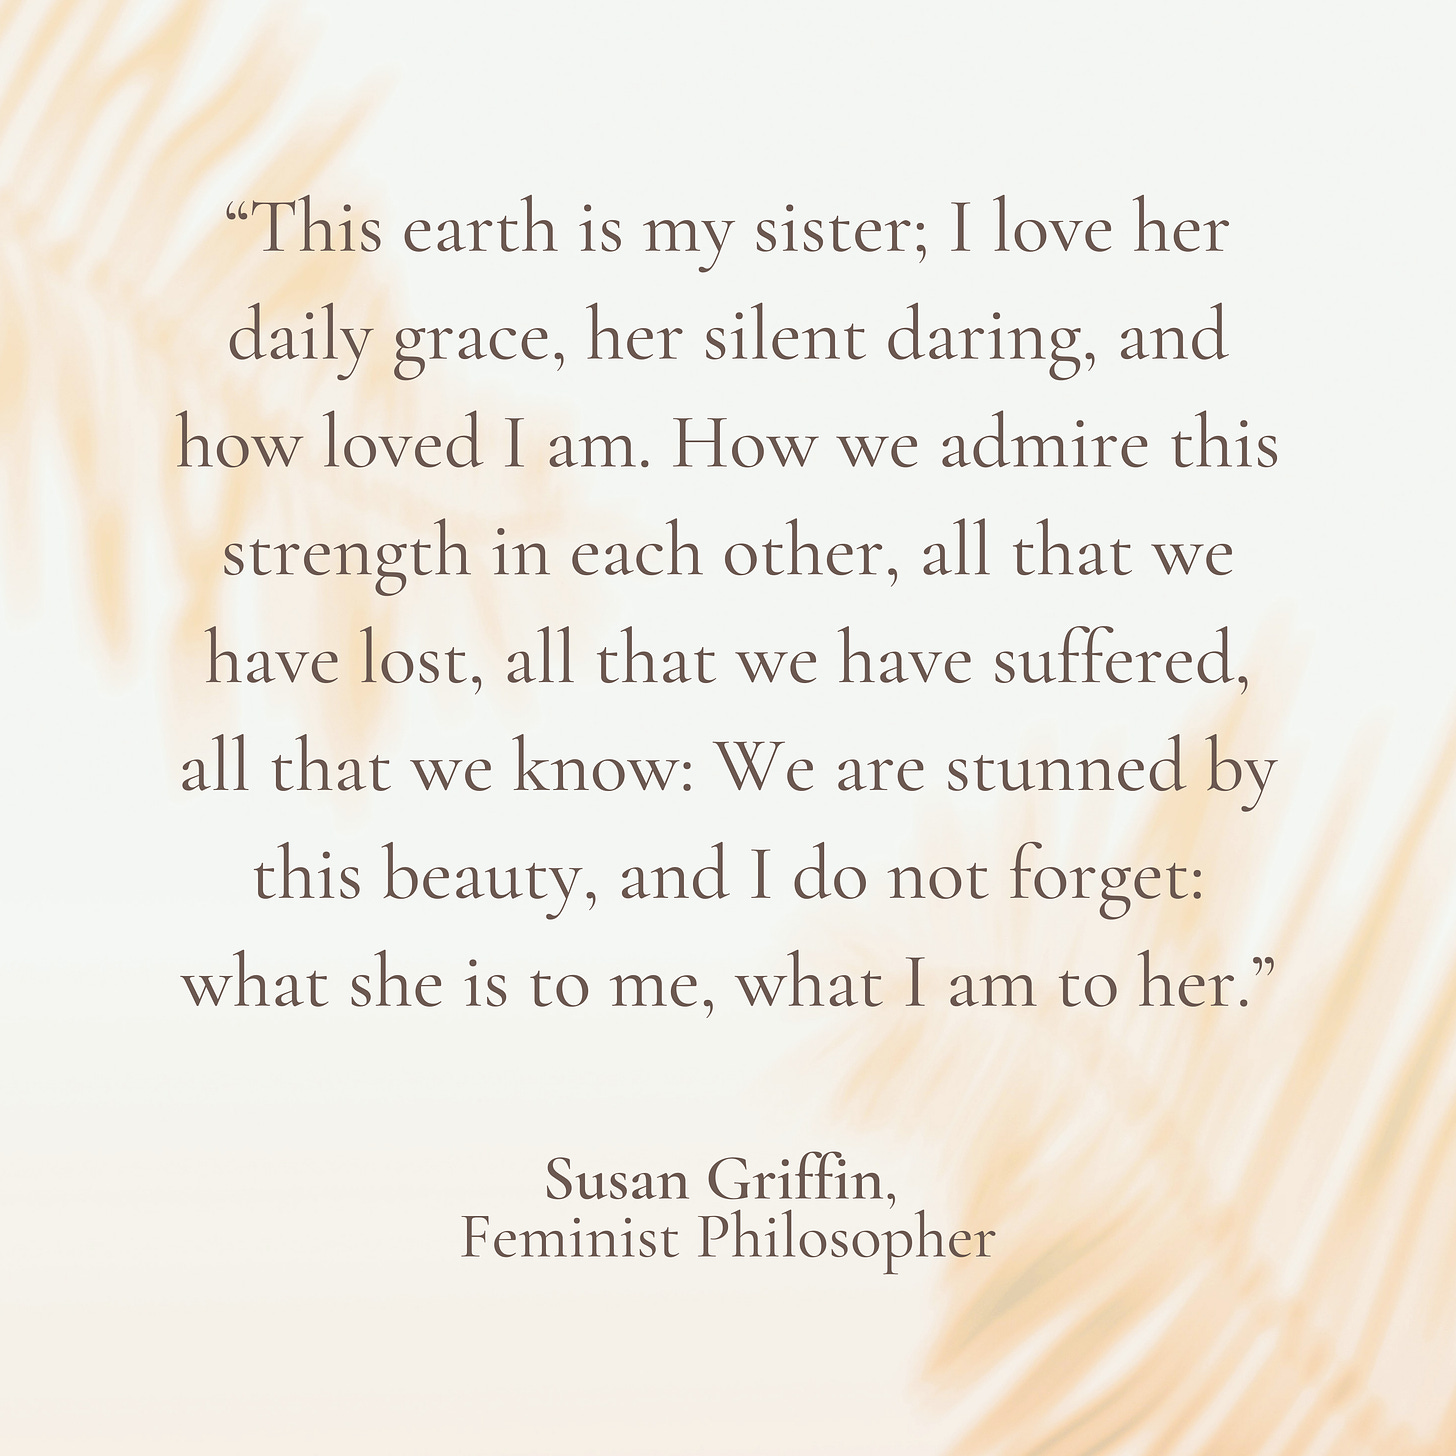 “This earth is my sister; I love her daily grace, her silent daring, and how loved I am. How we admire this strength in each other, all that we have lost, all that we have suffered, all that we know: We are stunned by this beauty, and I do not forget: what she is to me, what I am to her.”  Susan Griffin,  Feminist Philosopher